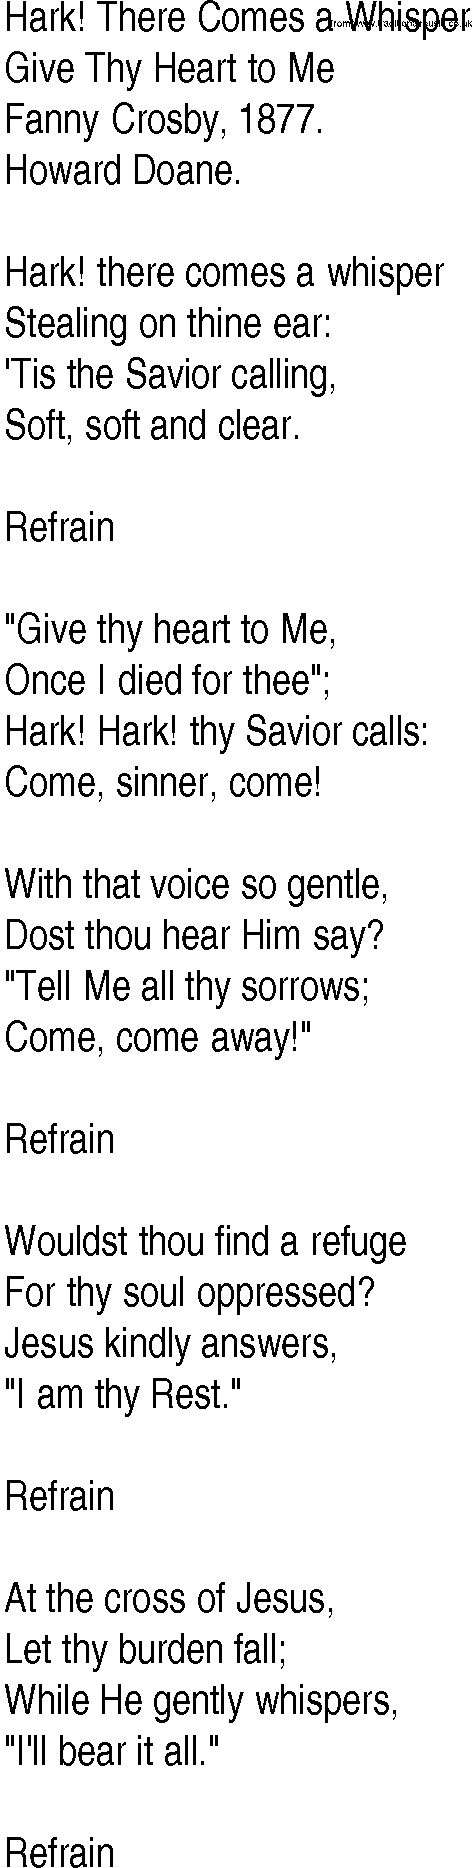 Hymn and Gospel Song: Hark! There Comes a Whisper by Fanny Crosby lyrics